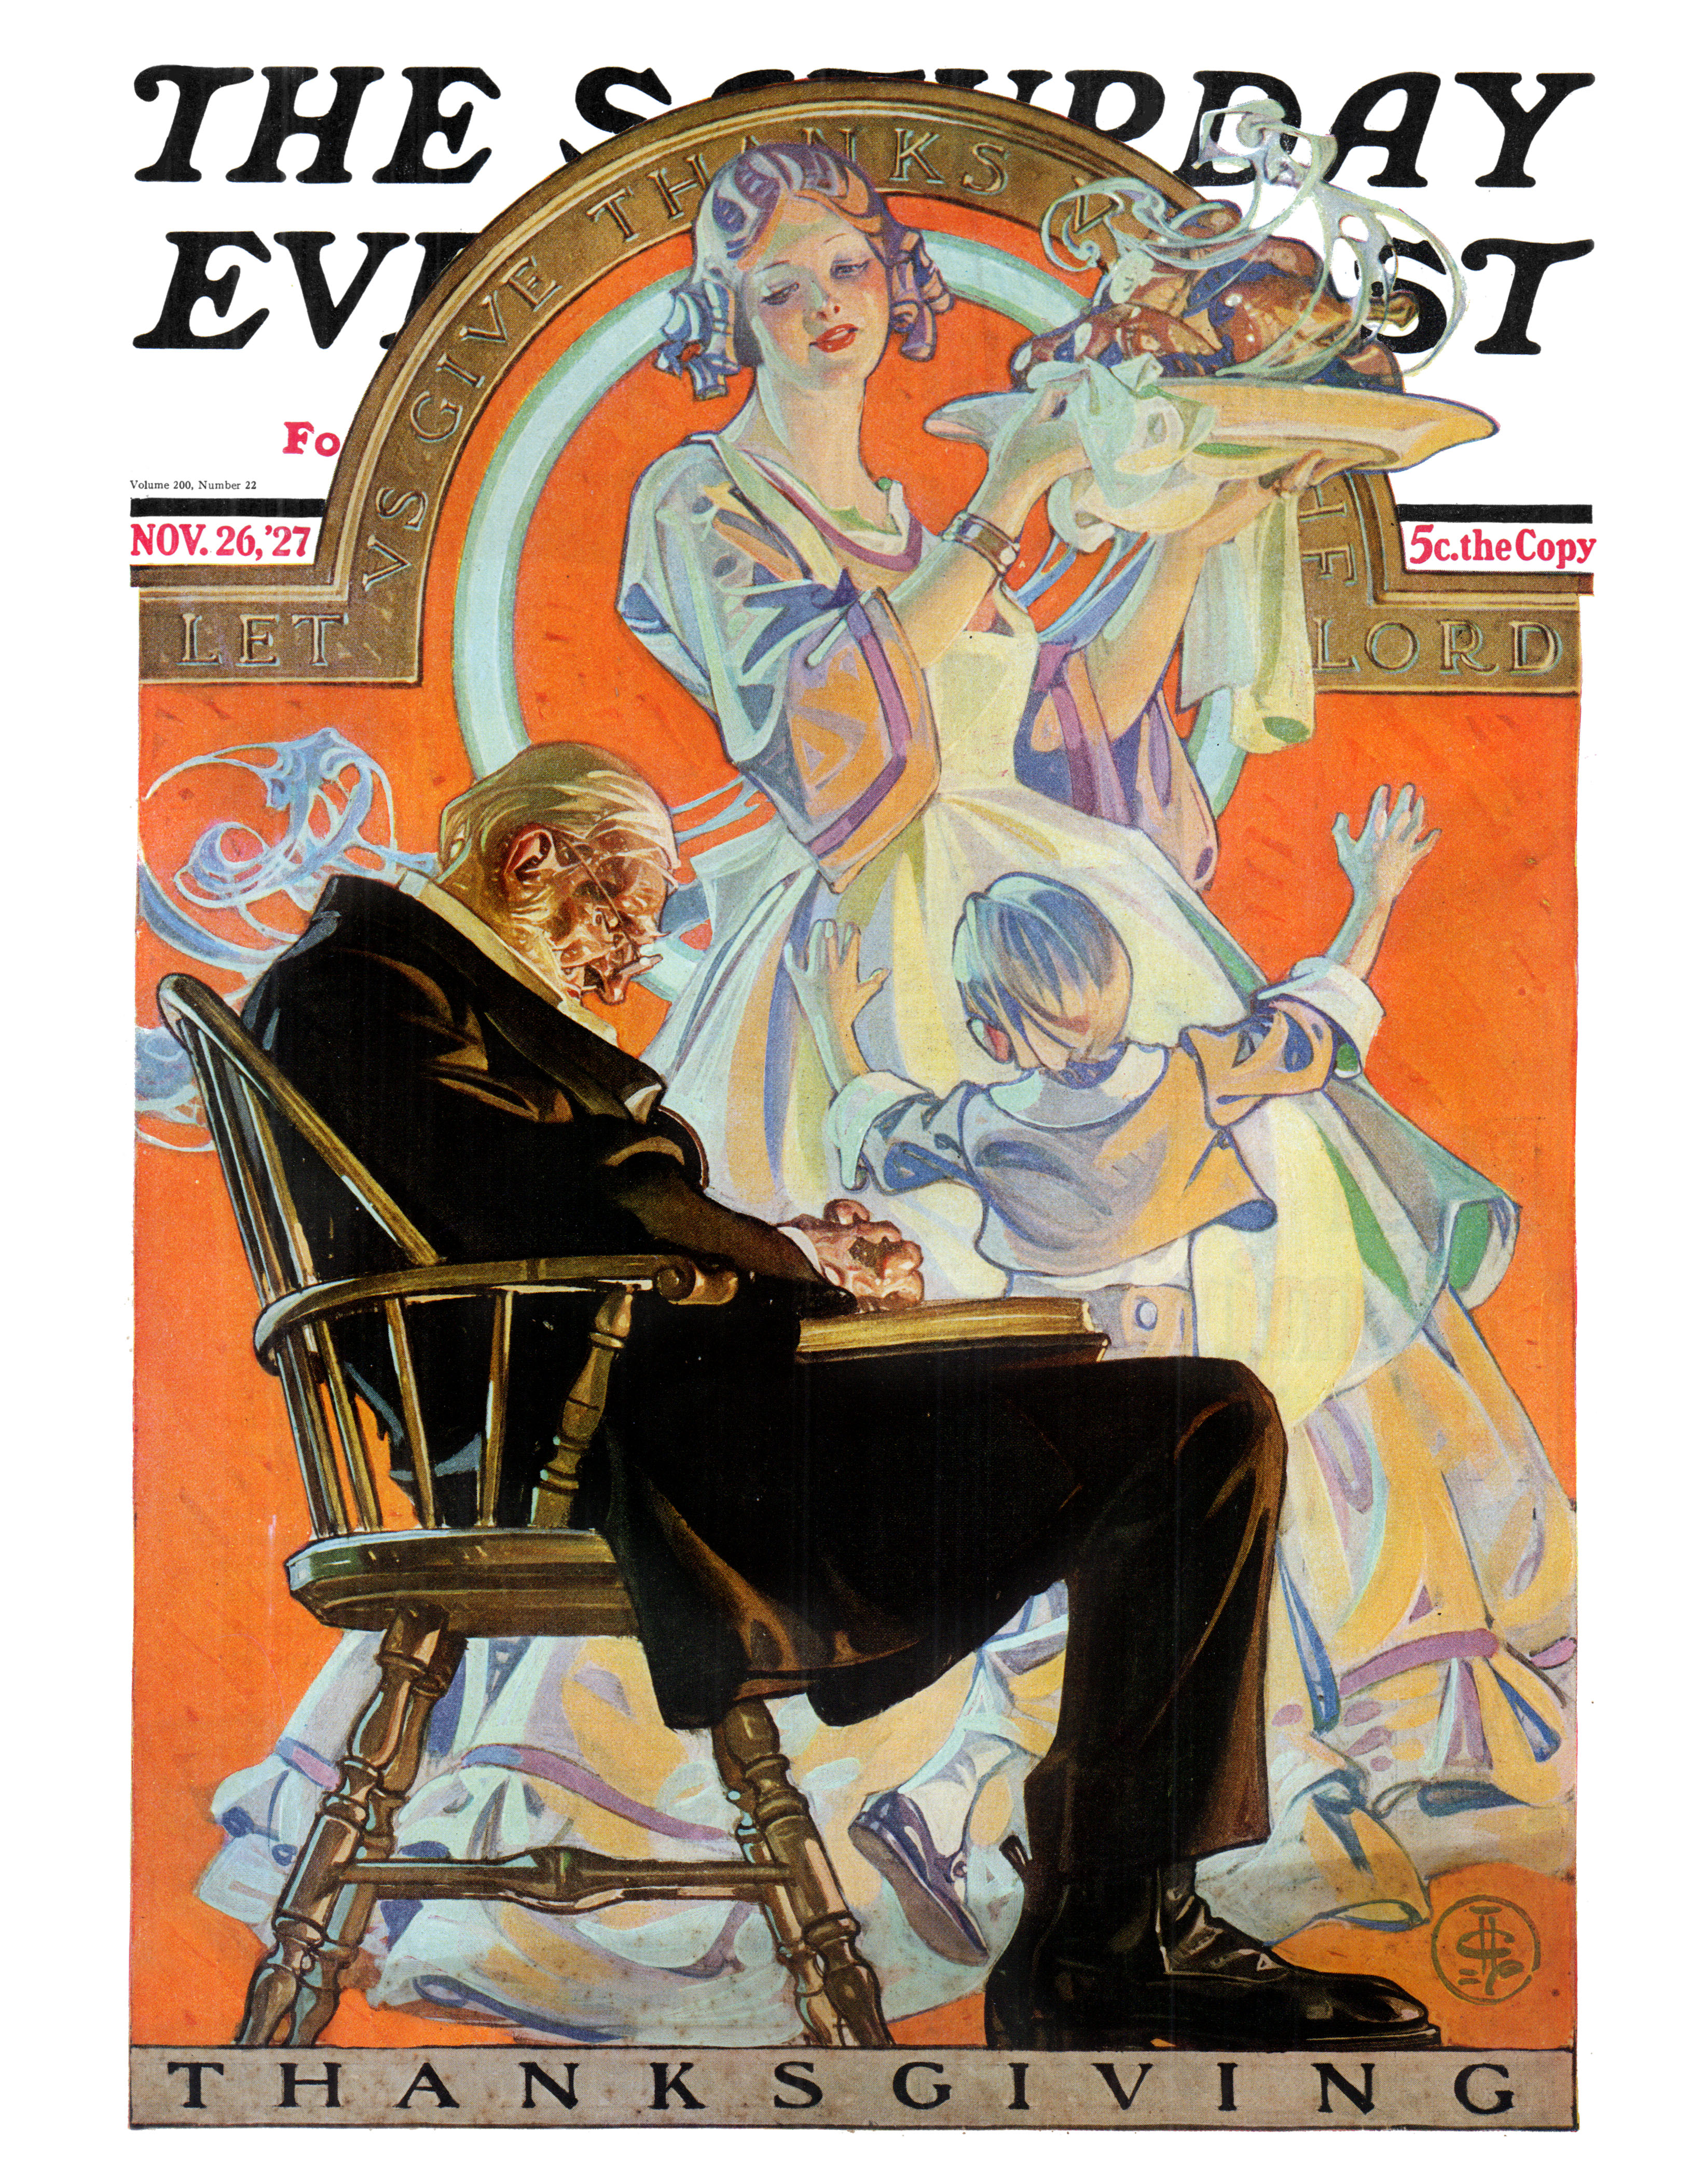 Saturday Evening Post v200 n22 [1927-11-26] cover